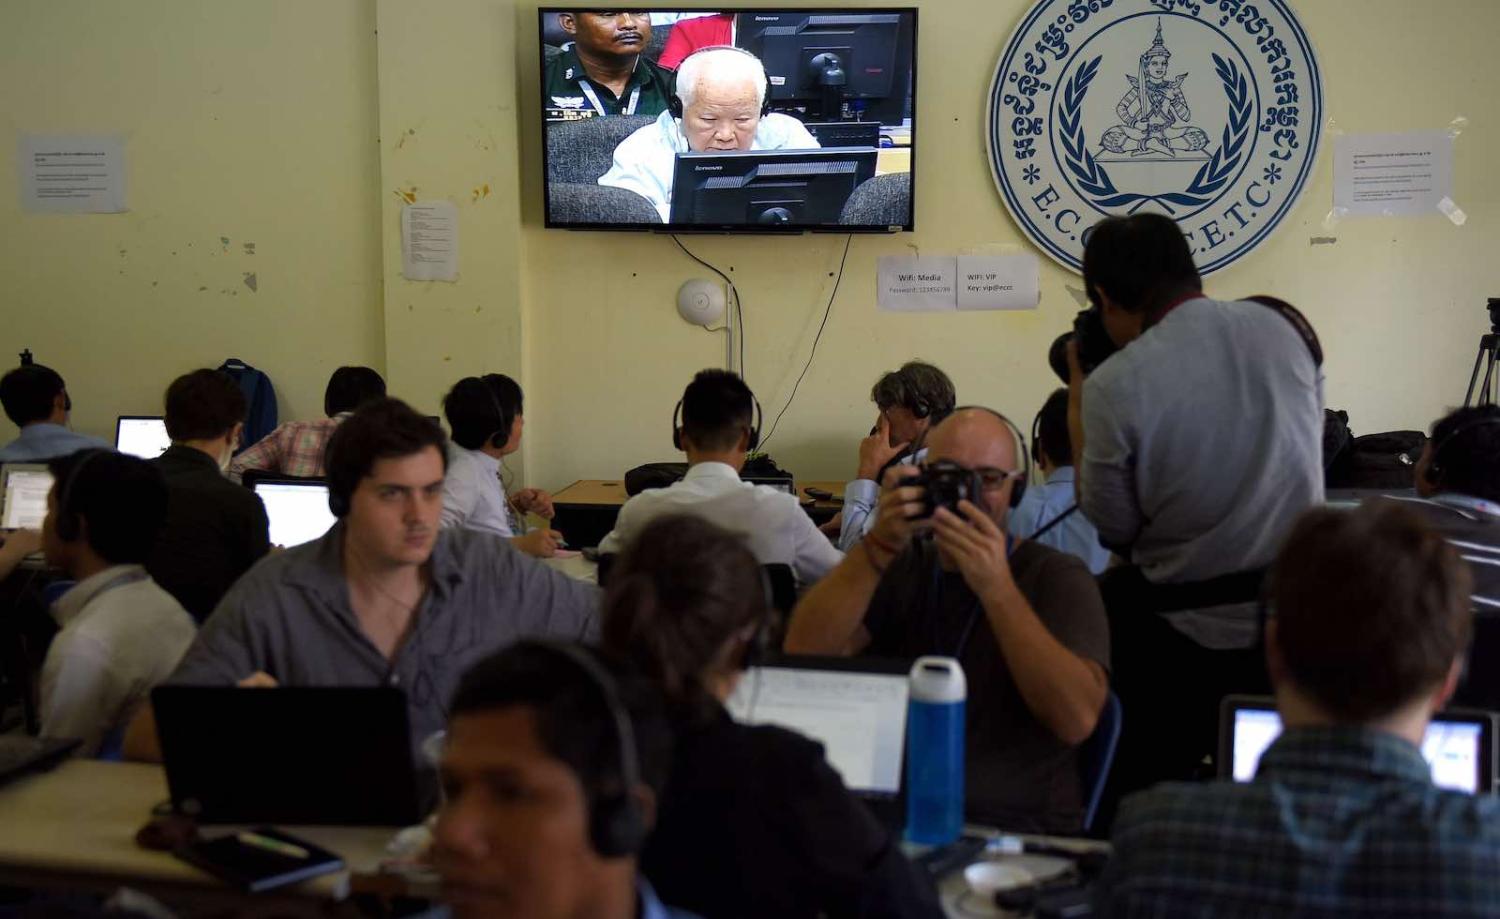 Journalists watch the verdict for former Khmer Rouge leader Khieu Samphan shown on a live video broadcast on 16 November (Photo: Tang Chhin Sothy via Getty)